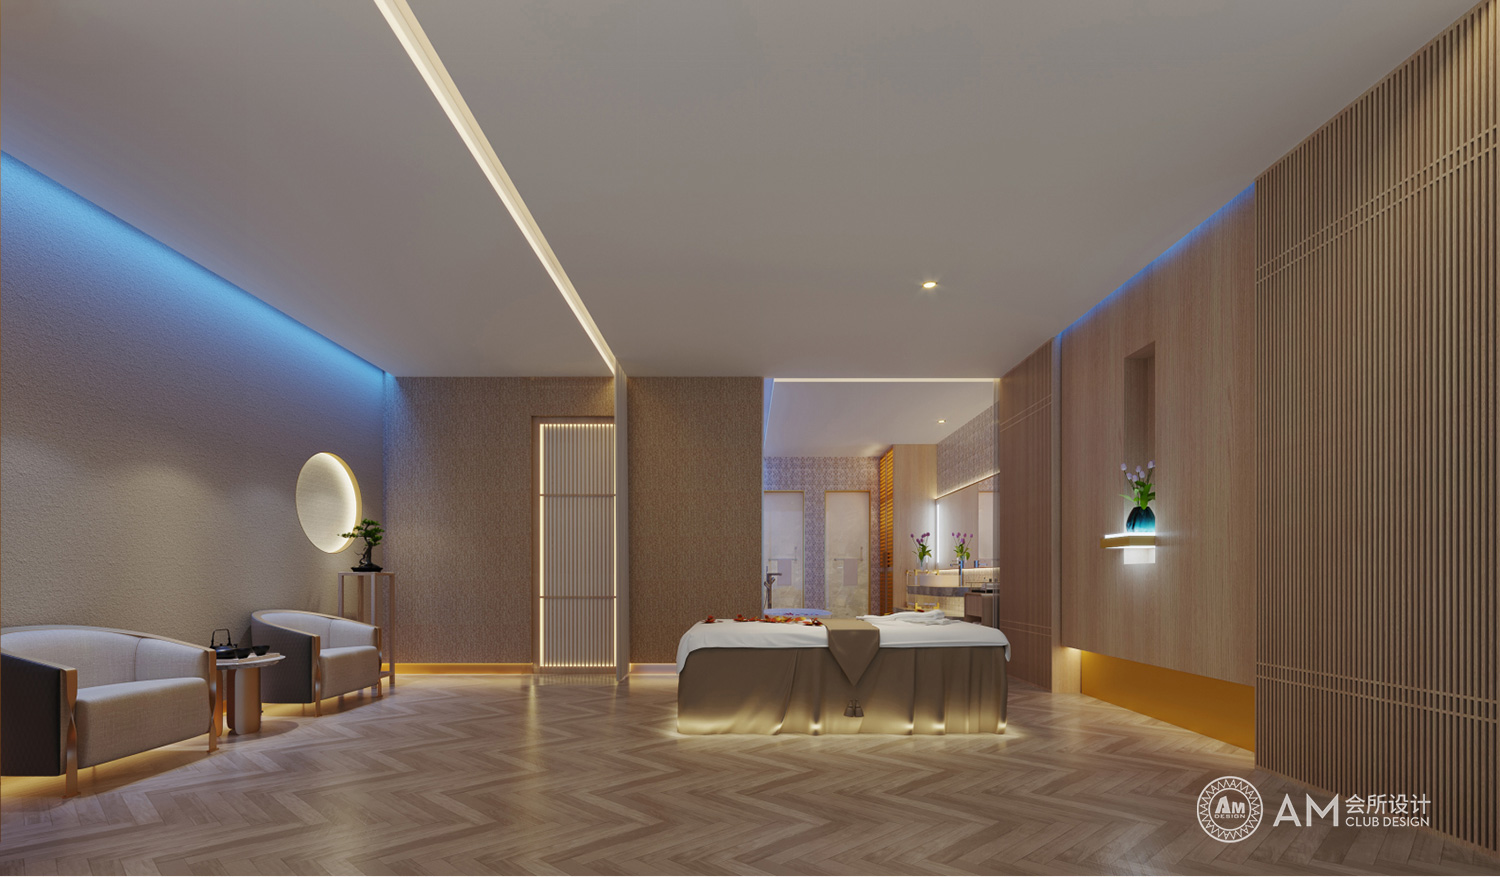 AM DESIGN | Design of spa room of spa club in Sijihuacheng